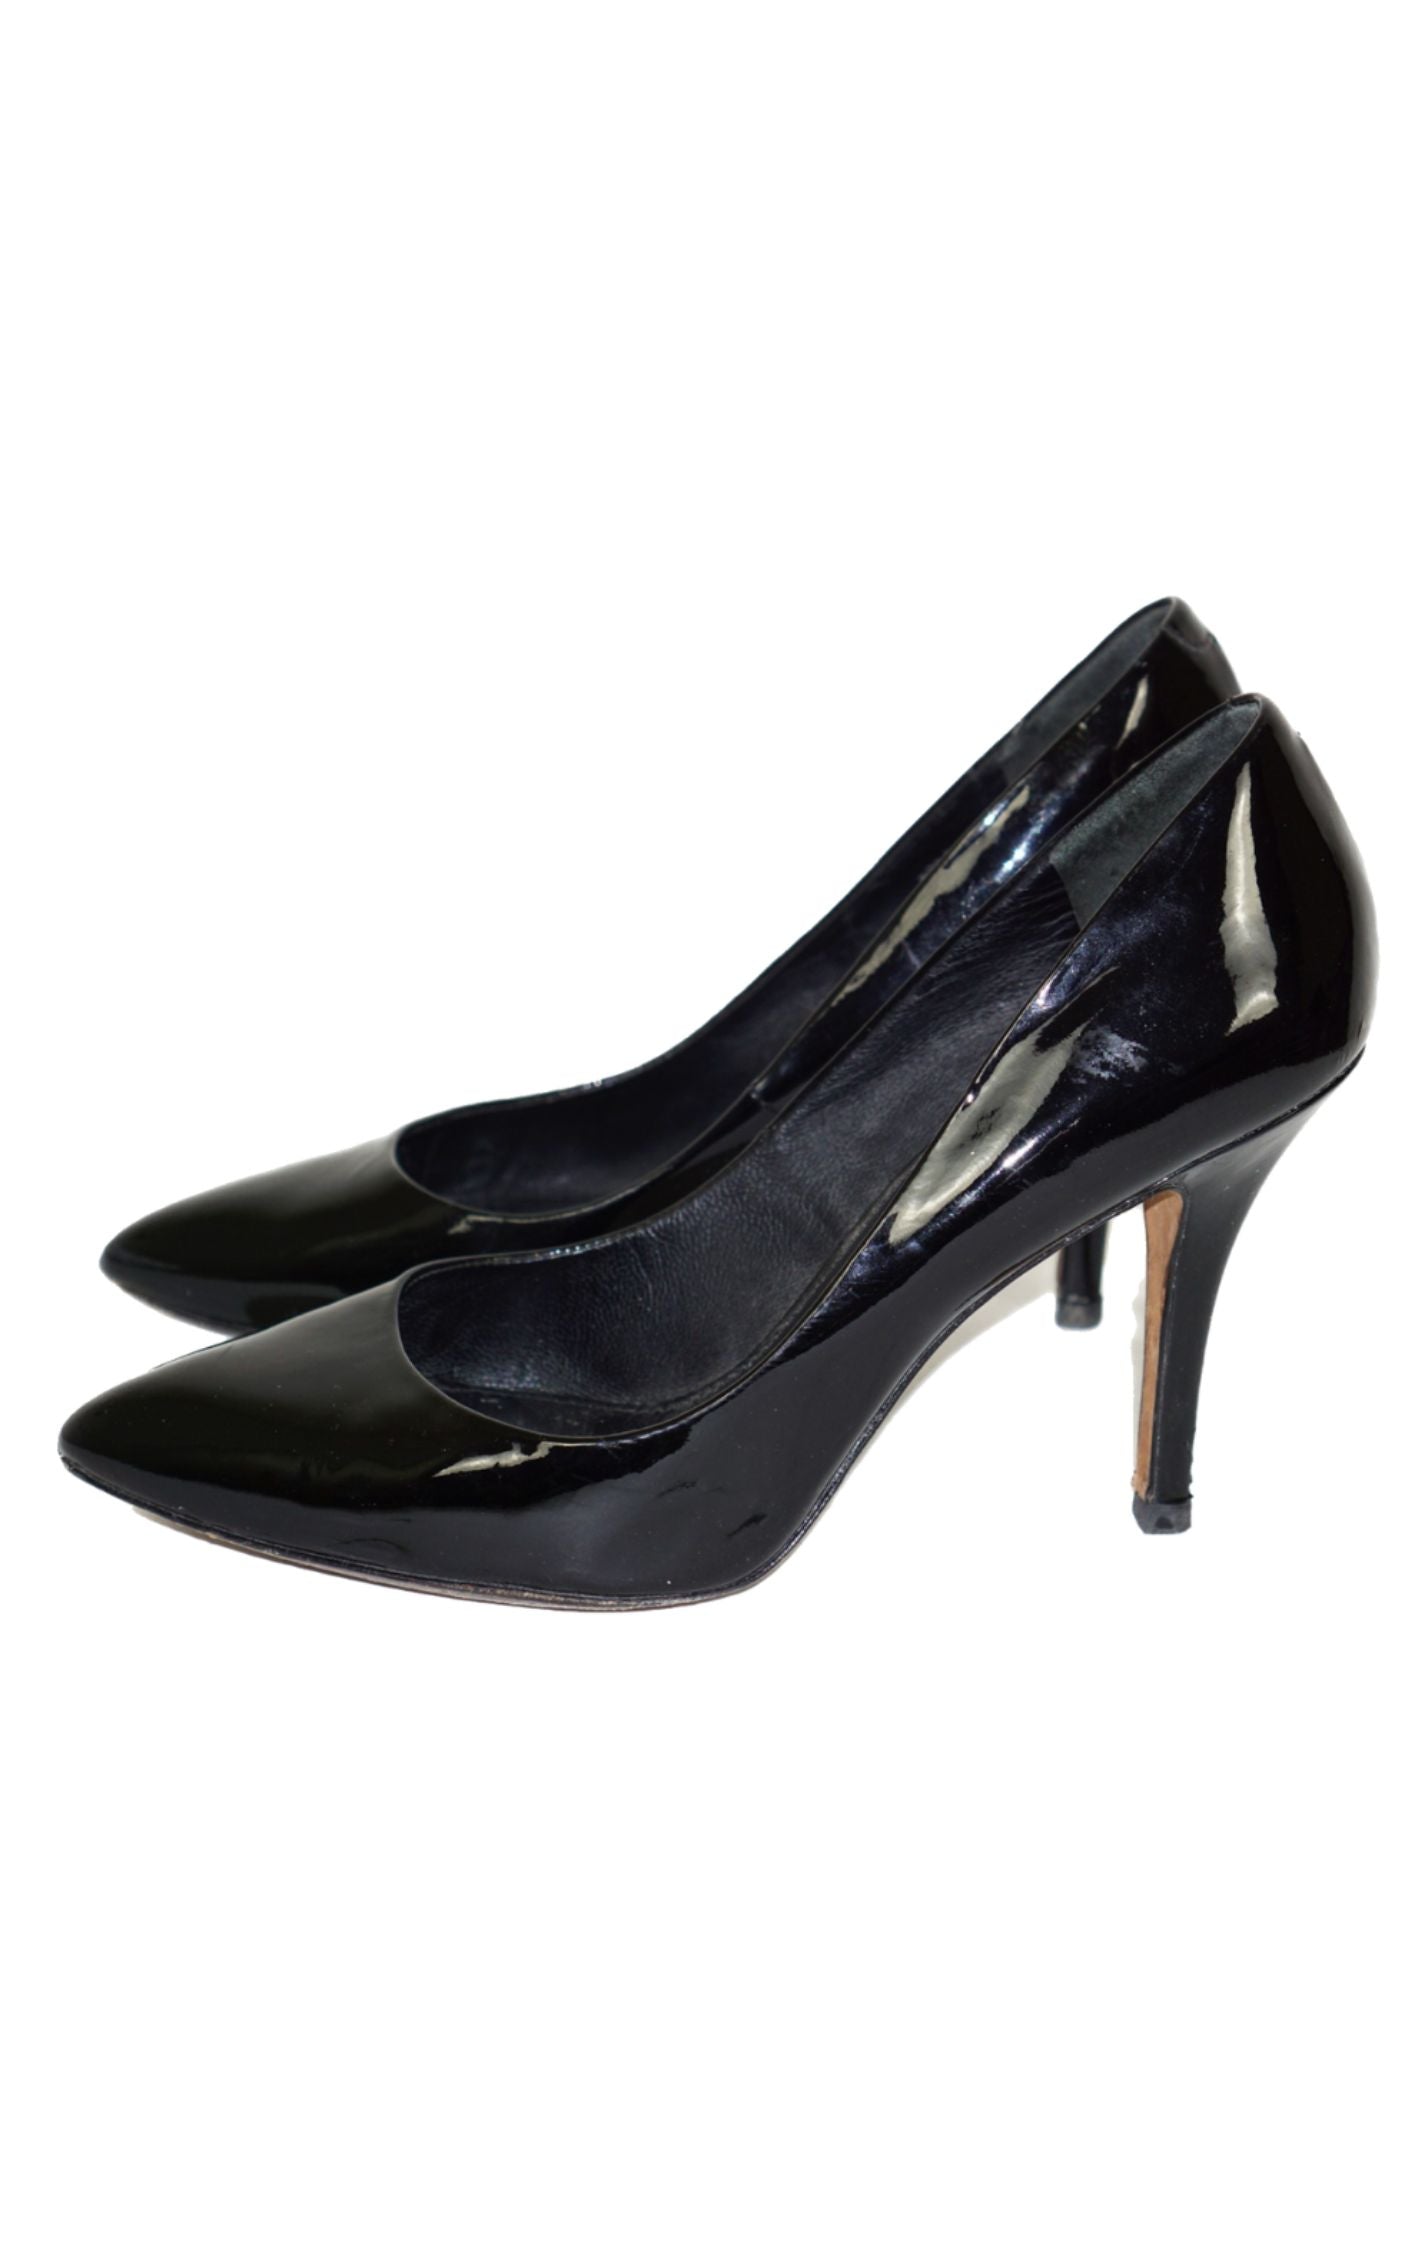 BRIAN ATWOOD Patent Leather Black Pumps resellum